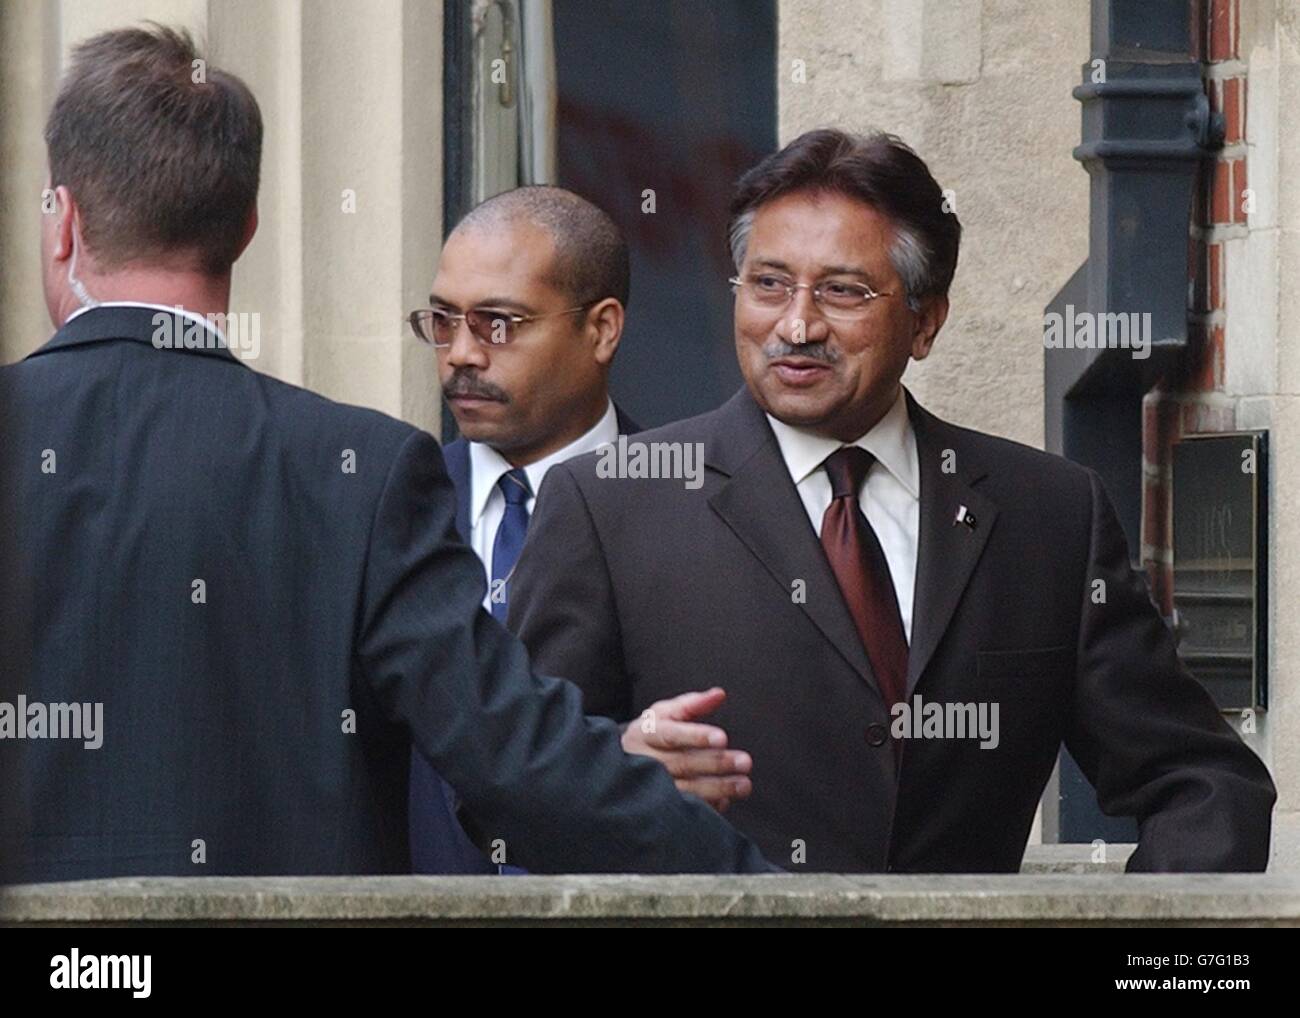 President Musharraf of Pakistan arrives at the Institute for Strategic Studies in London, amid tight security after details of his movements in the capital were found in the street by a member of the public. General Musharraf believes the US-led coalition must speed up its 'exit strategy' from Iraq and that setting up effective Iraqi security forces was the coalition's way out of Iraq. Stock Photo